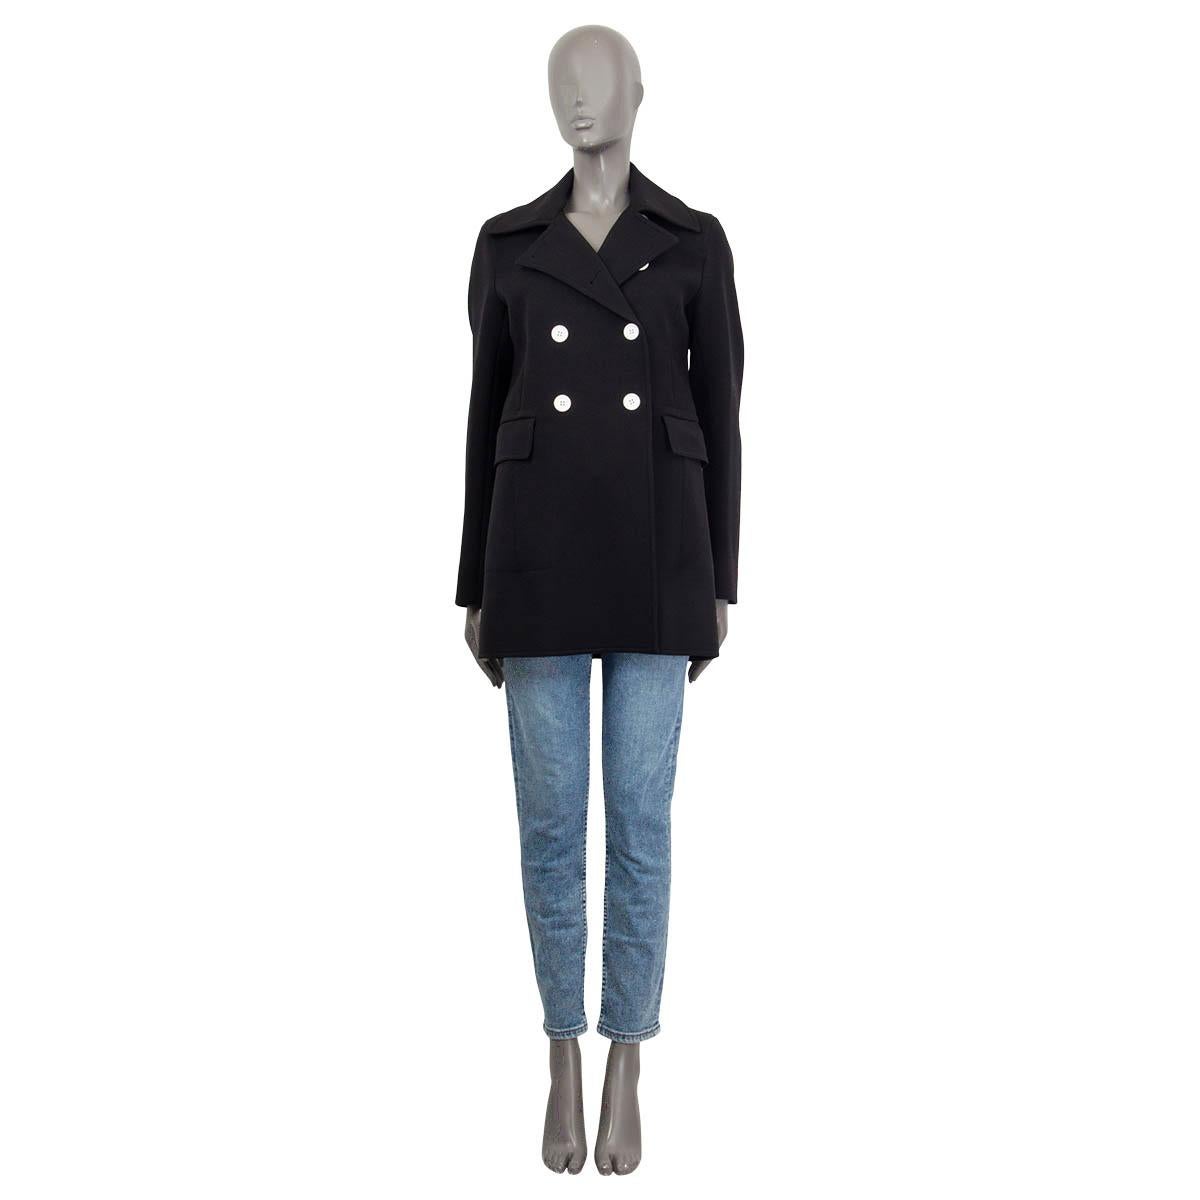 100% authentic Céline double breasted short coat in black polyamide (54%), virgin wool (45%) and elastane (1%). Features contrast buttons in white and two flap pockets on the front. Opens with six buttons on the front. Lined in black mulberry silk